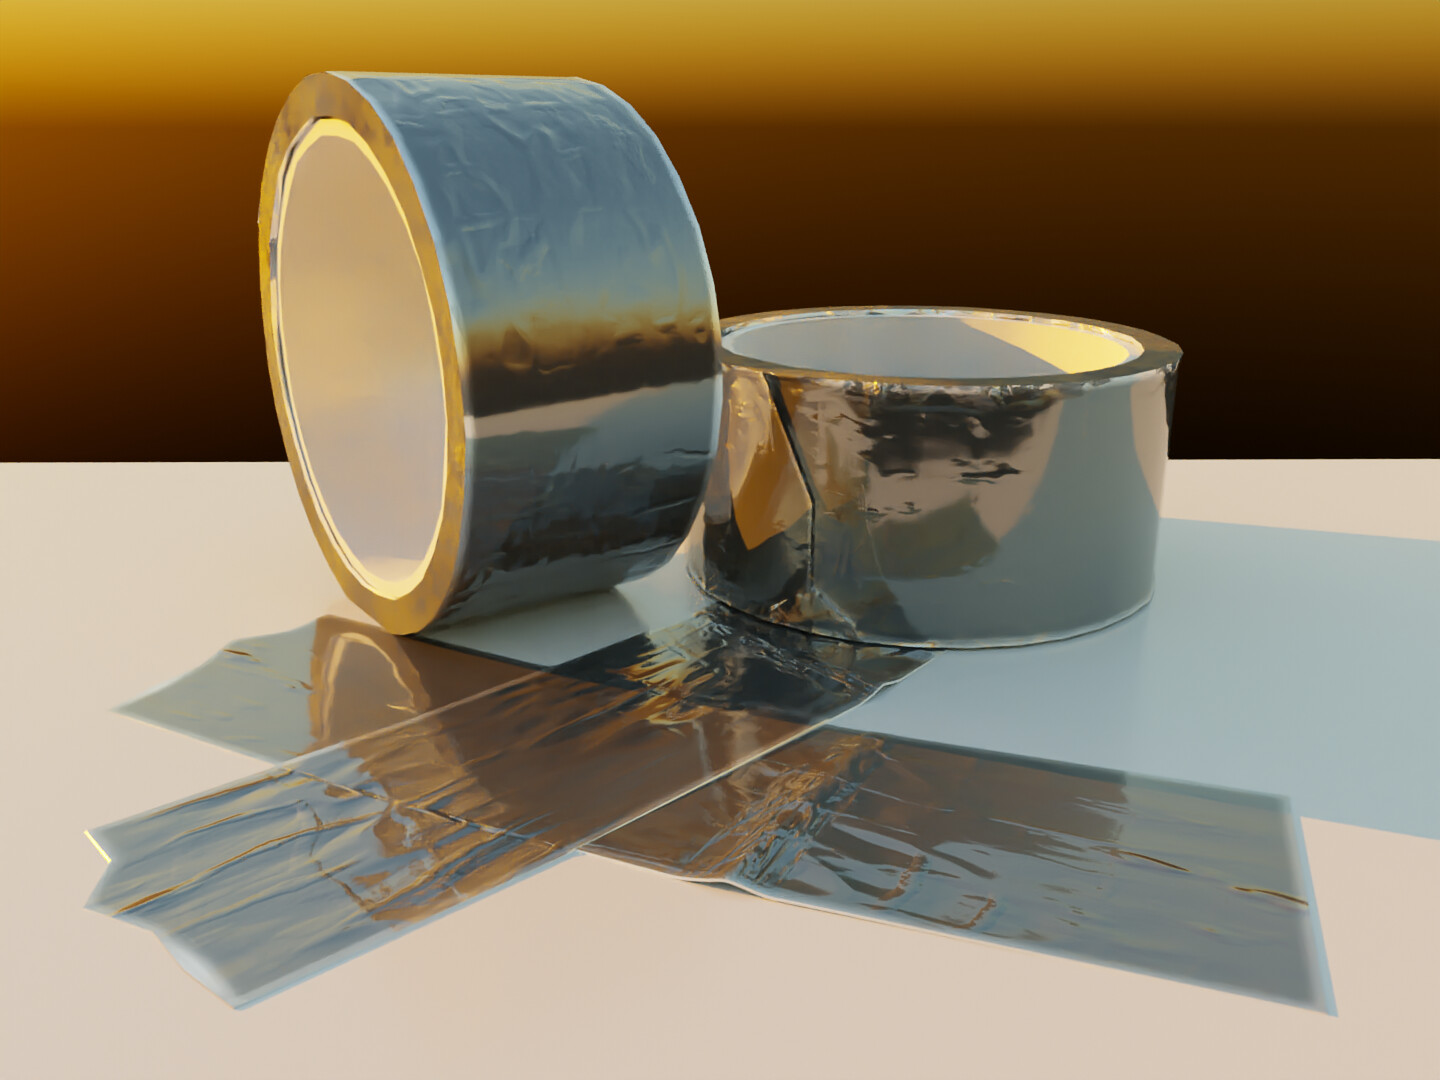 Simple metallic tape - Finished Projects - Blender Artists Community